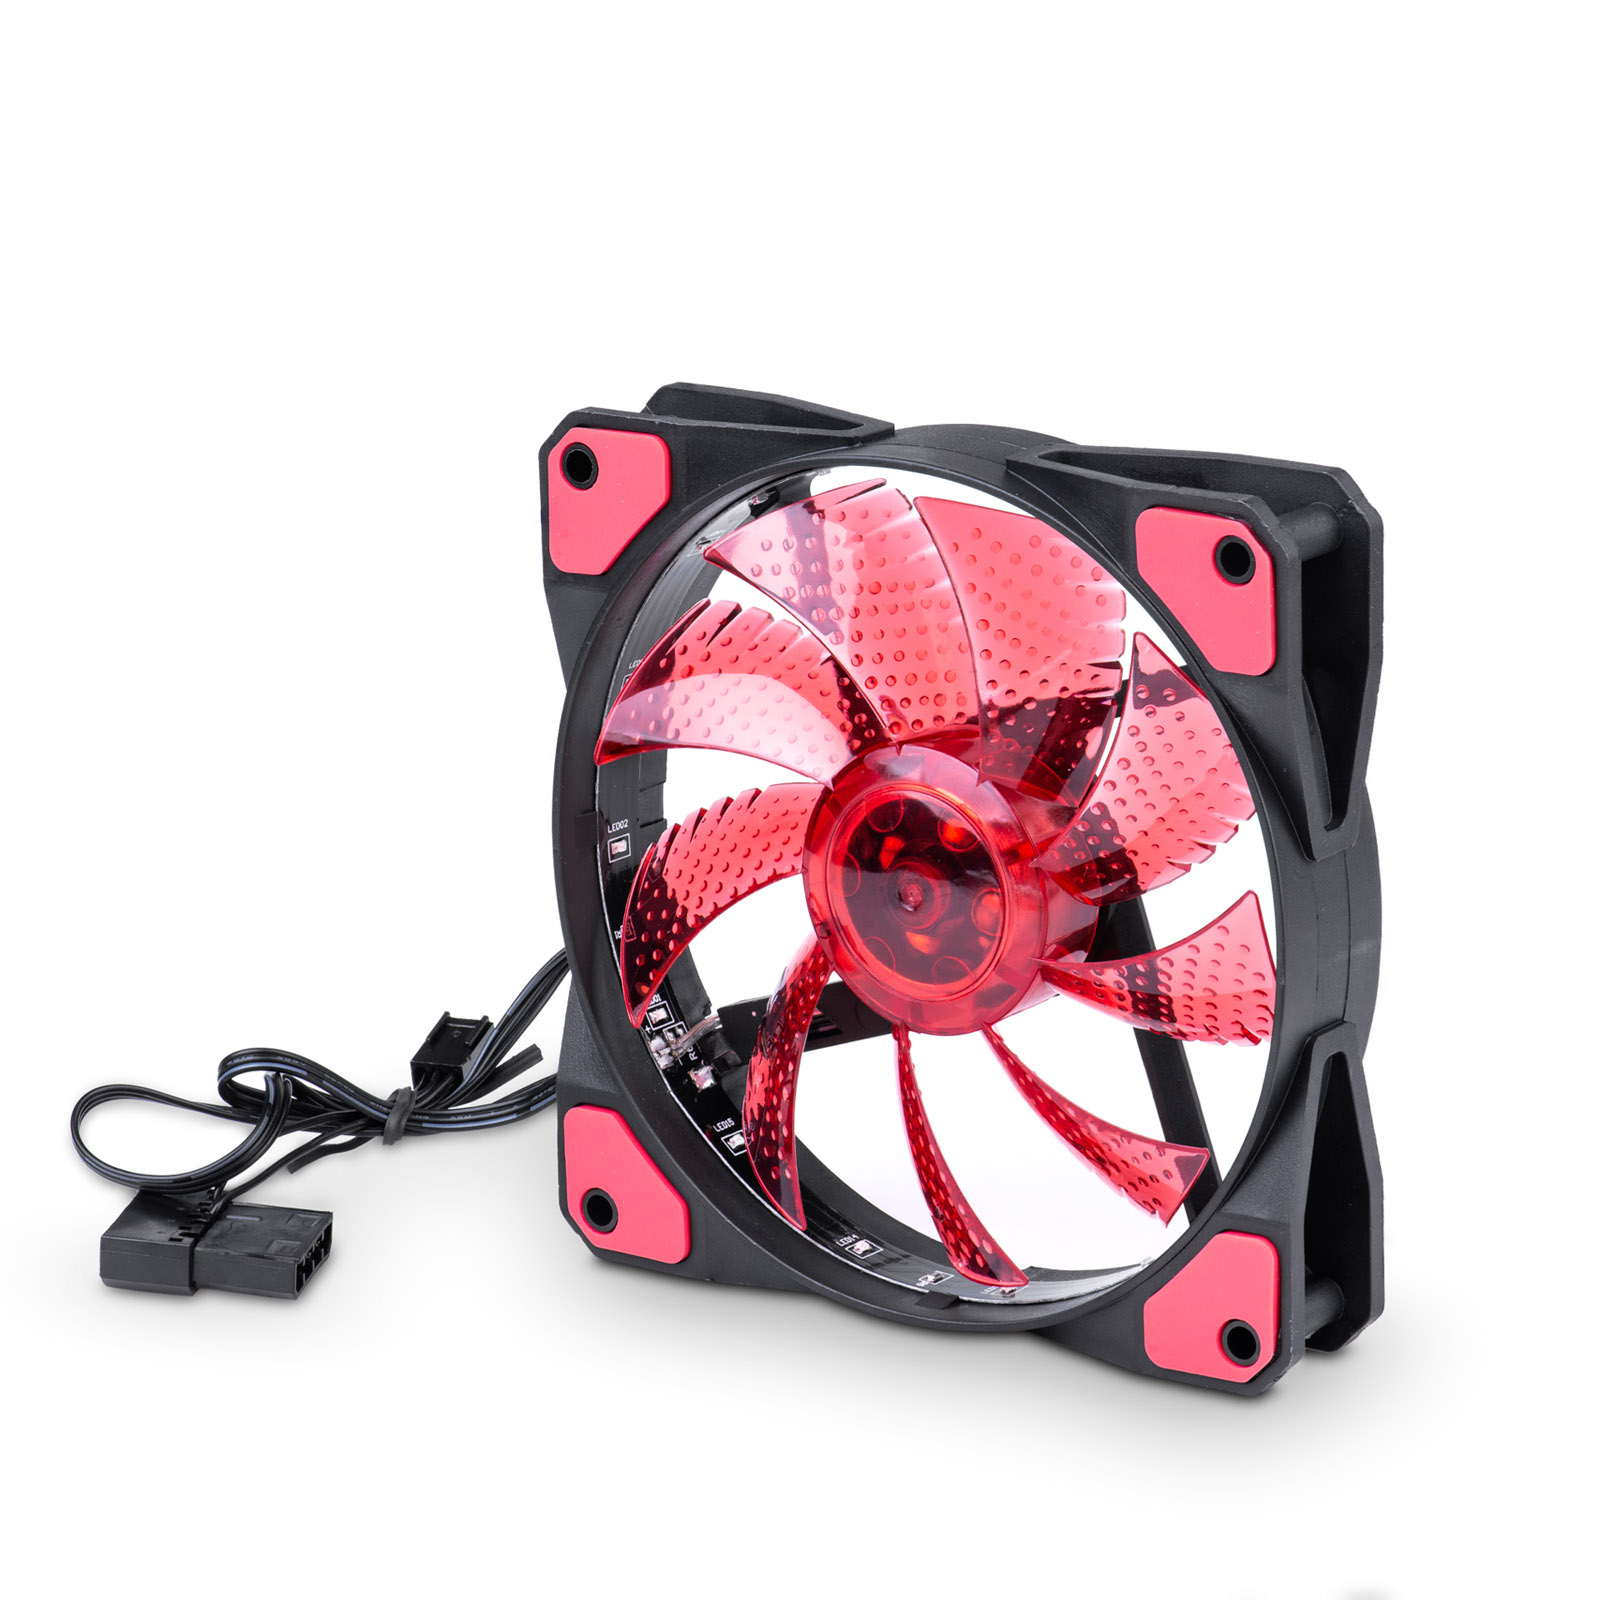 Fan 120mm MOLEX / 3-pin 15 LED red AW-12C-BR